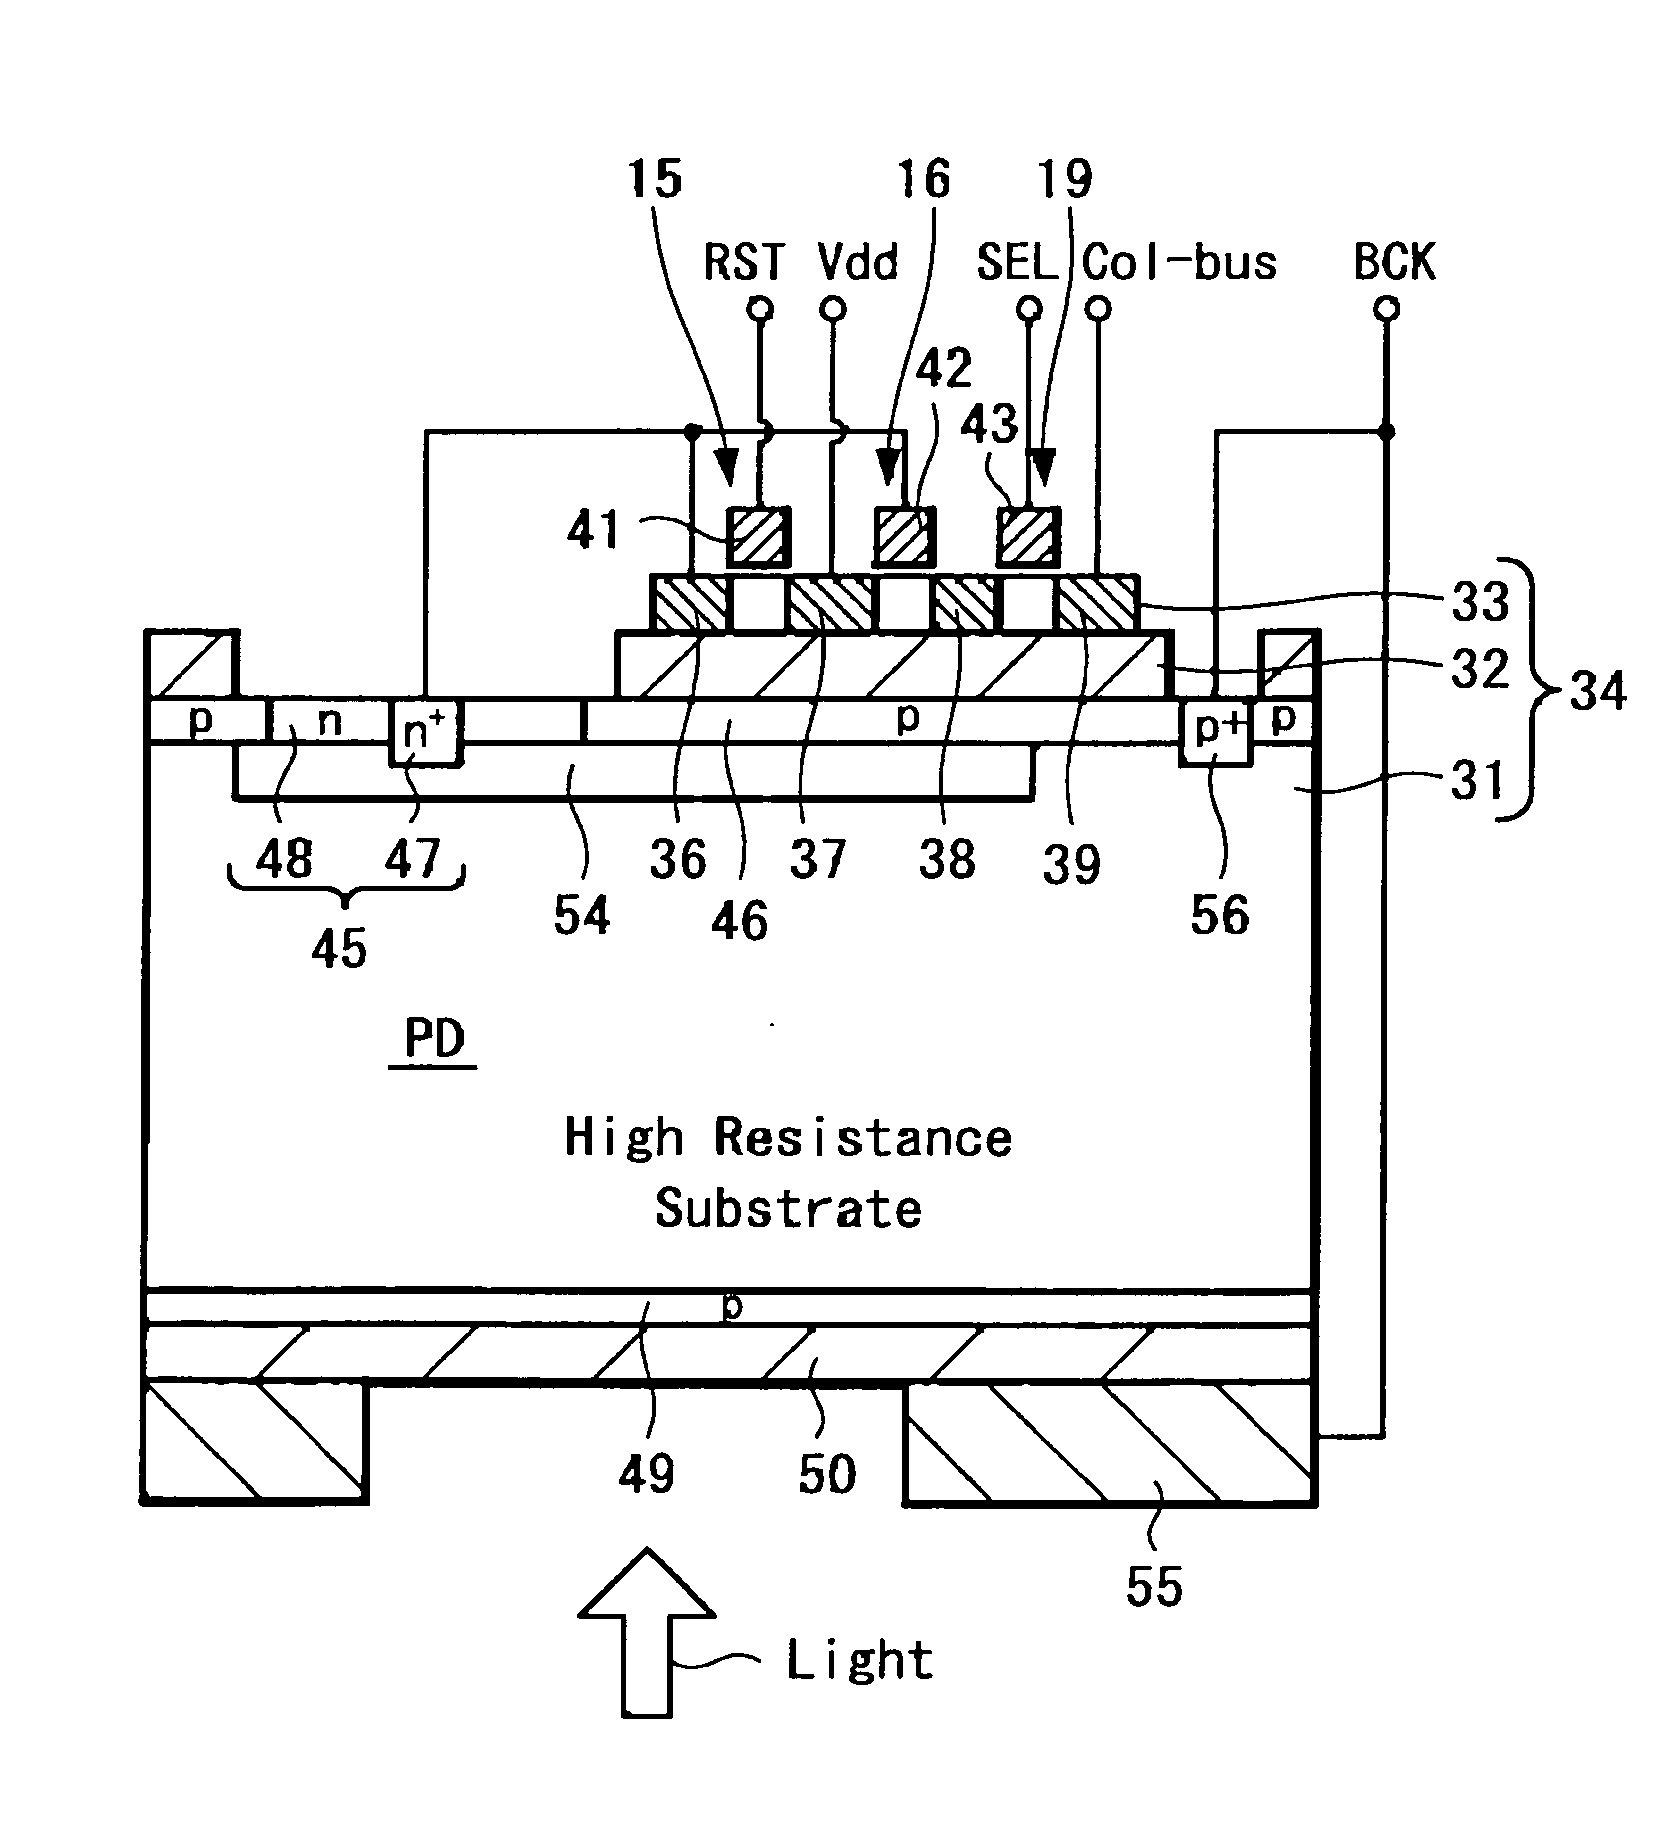 Back-illuminated type solid-state imaging device